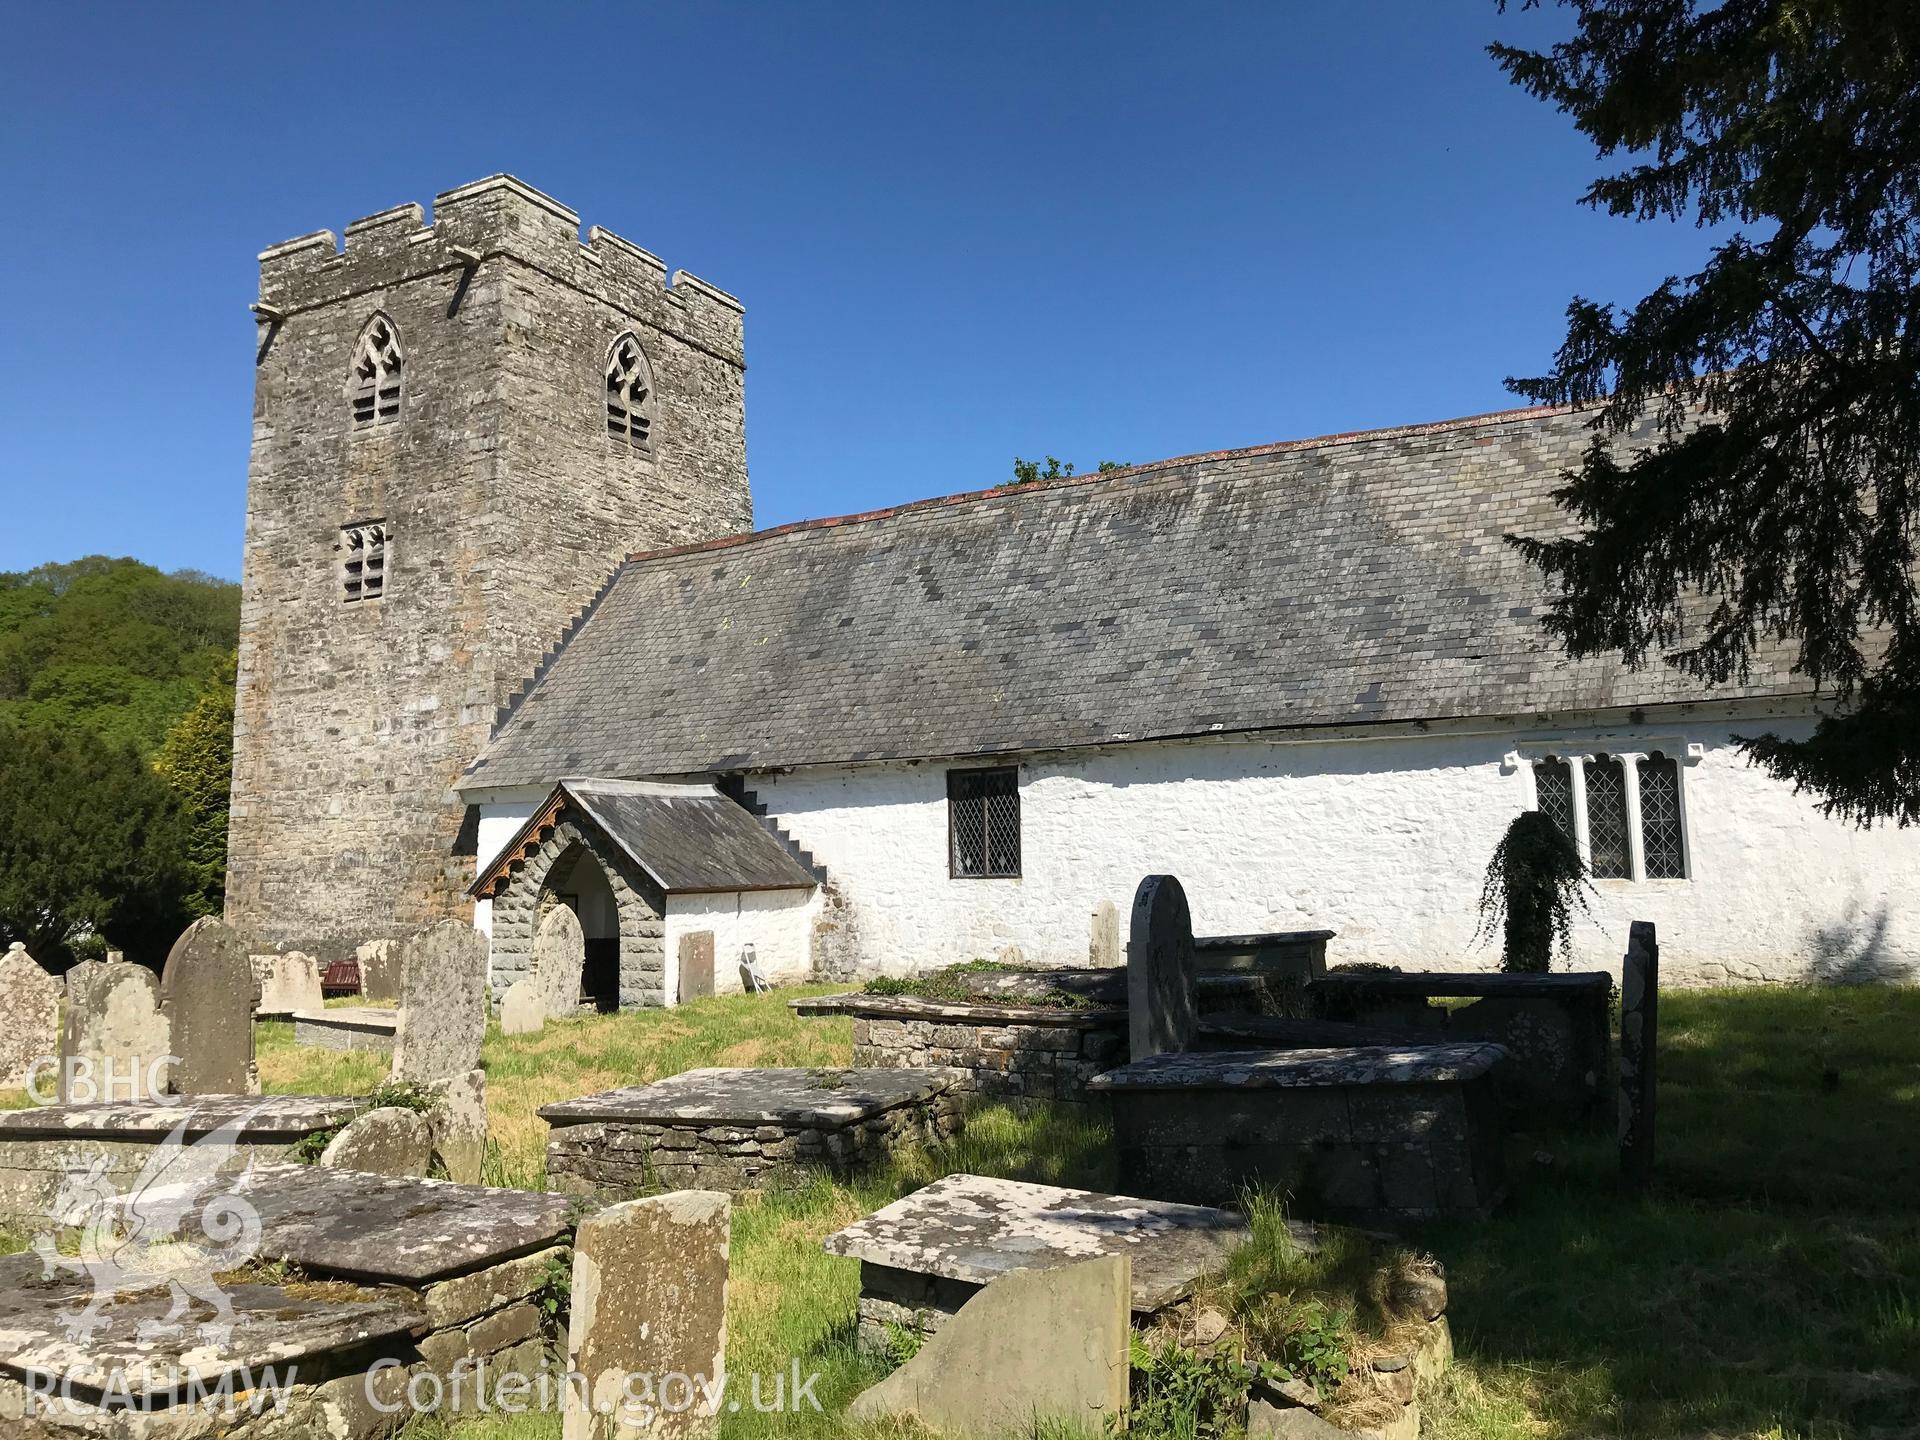 Colour photo showing exterior view of St. Cewydd's Church, Diserth, taken by Paul R. Davis, 19th May 2018.